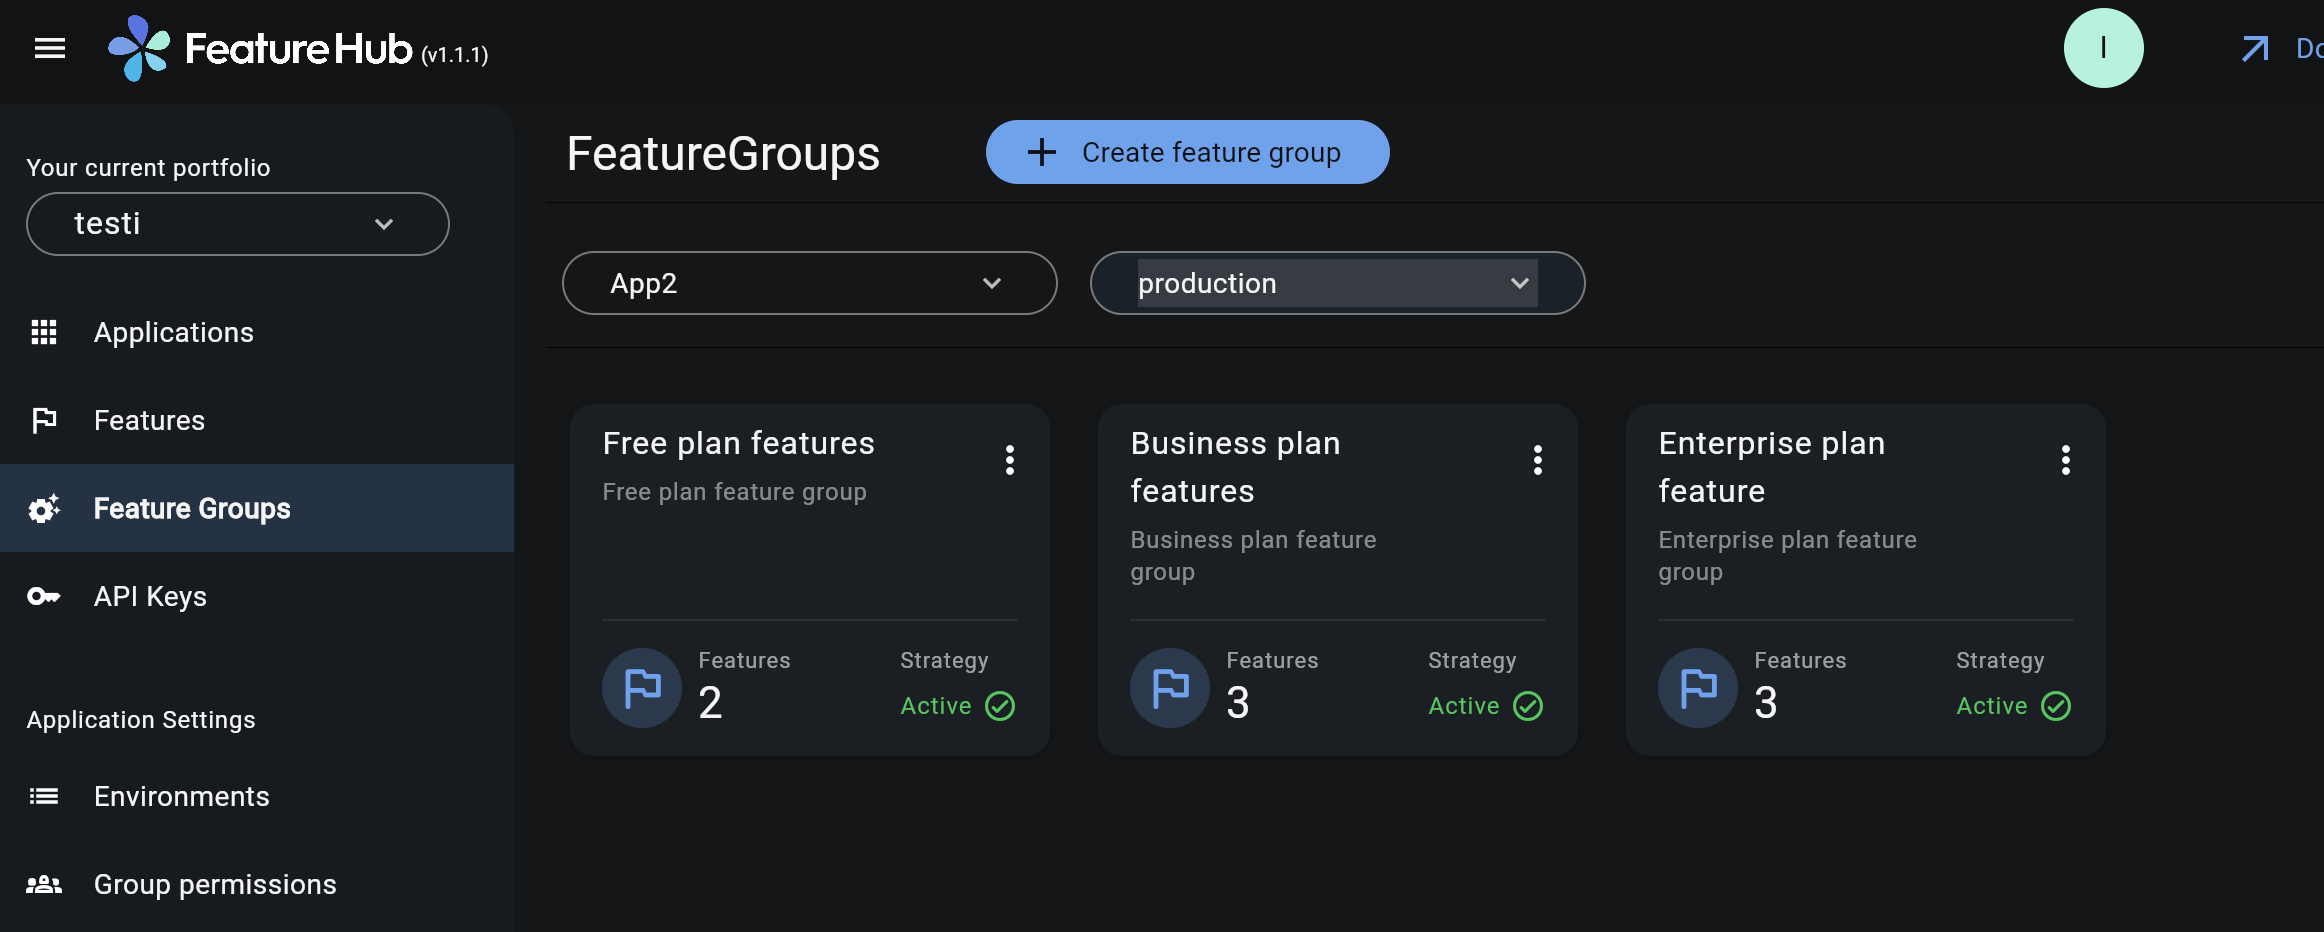 Feature Groups page